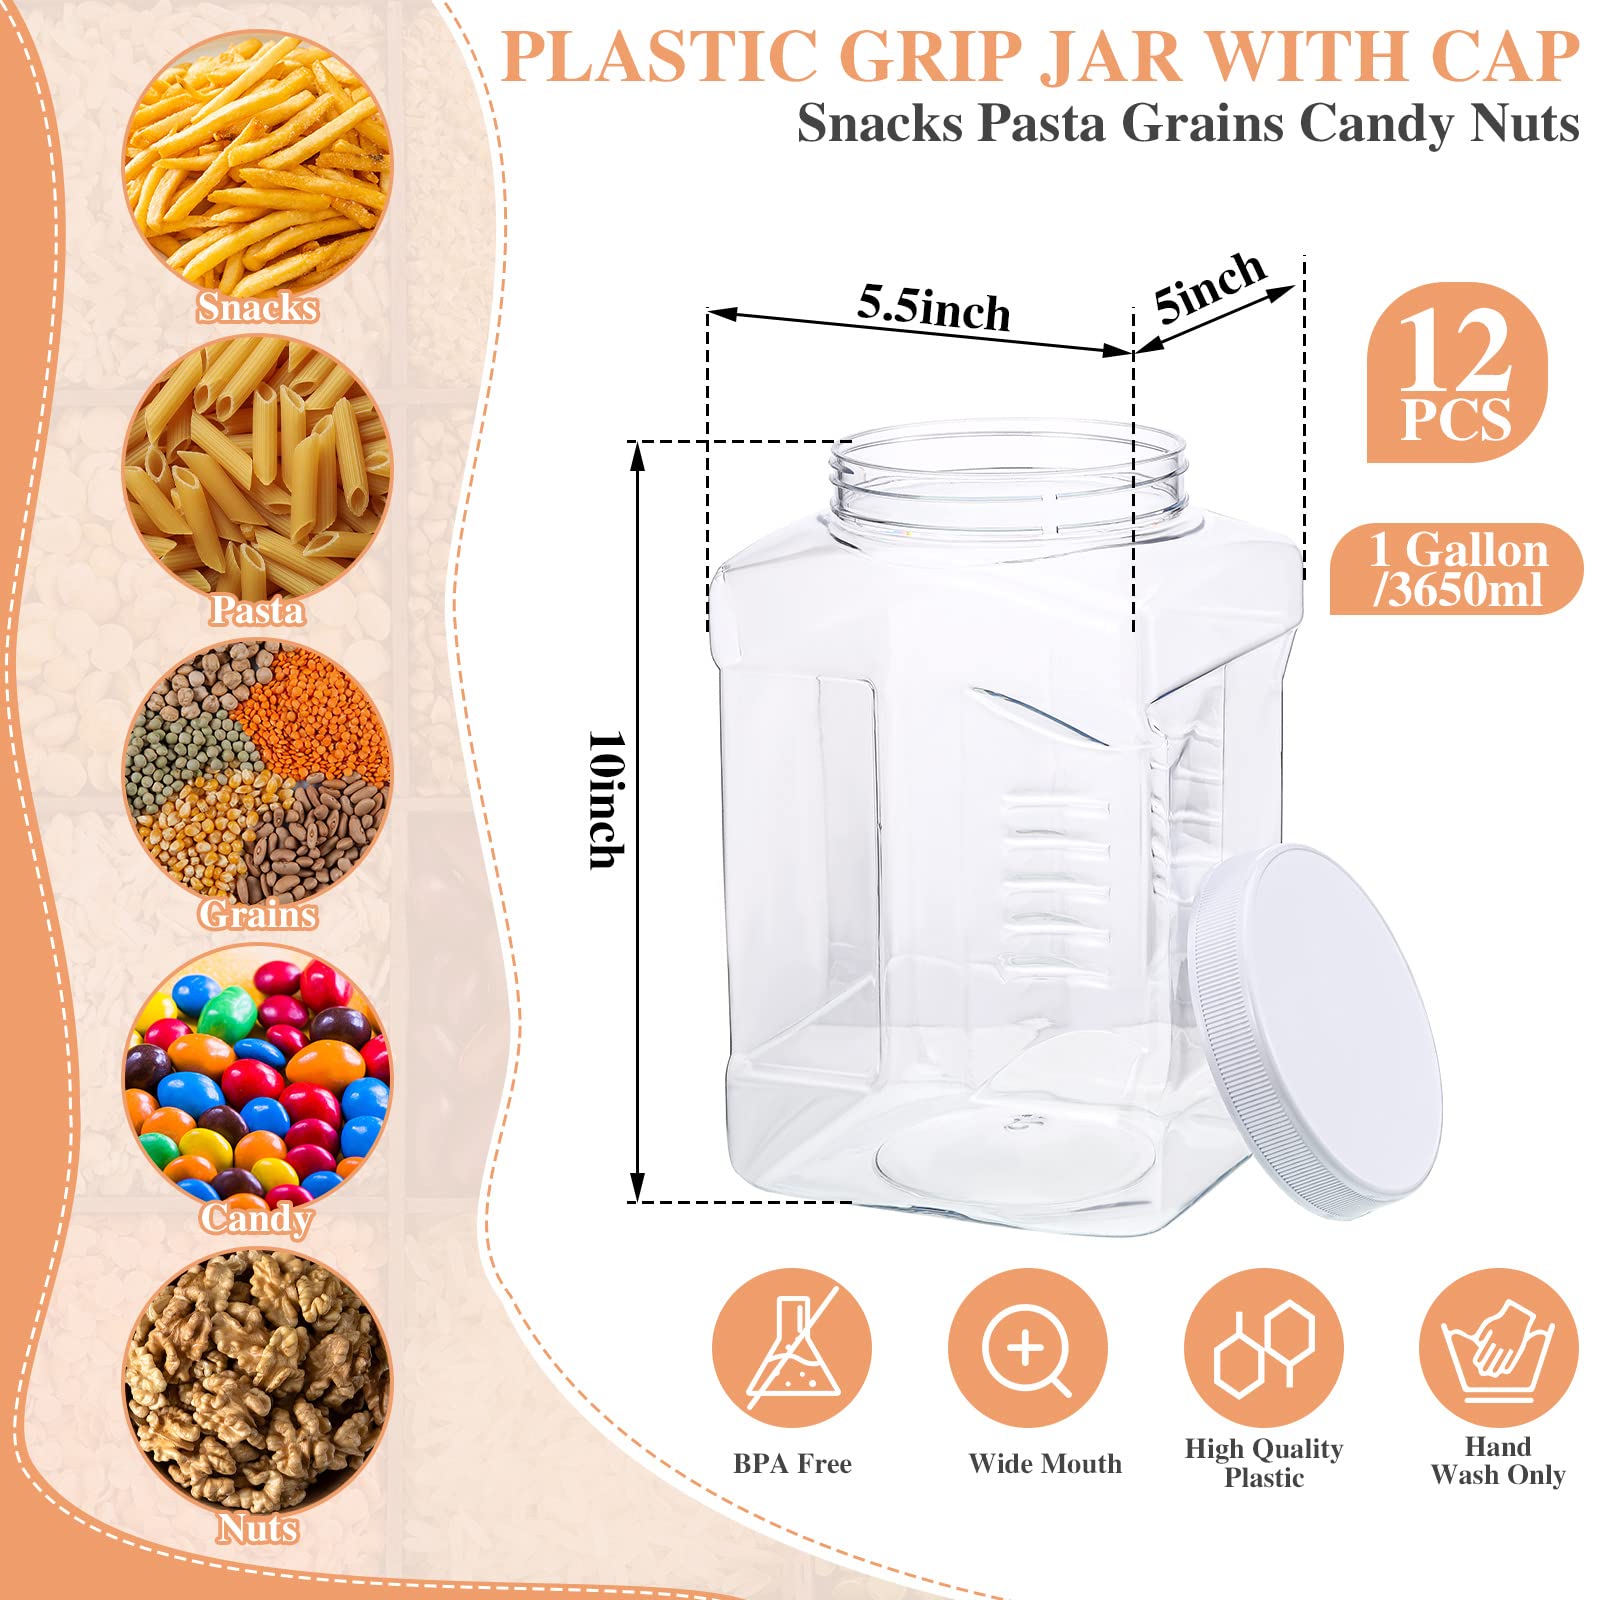 12 Packs 1 Gallon Plastic Grip Jar with Cap Clear Storage Containers Grip Jars Multi-use Empty Containers Household Dried Food Canisters BPA Free for Kitchen Fermentation Food Storage (White Lid)